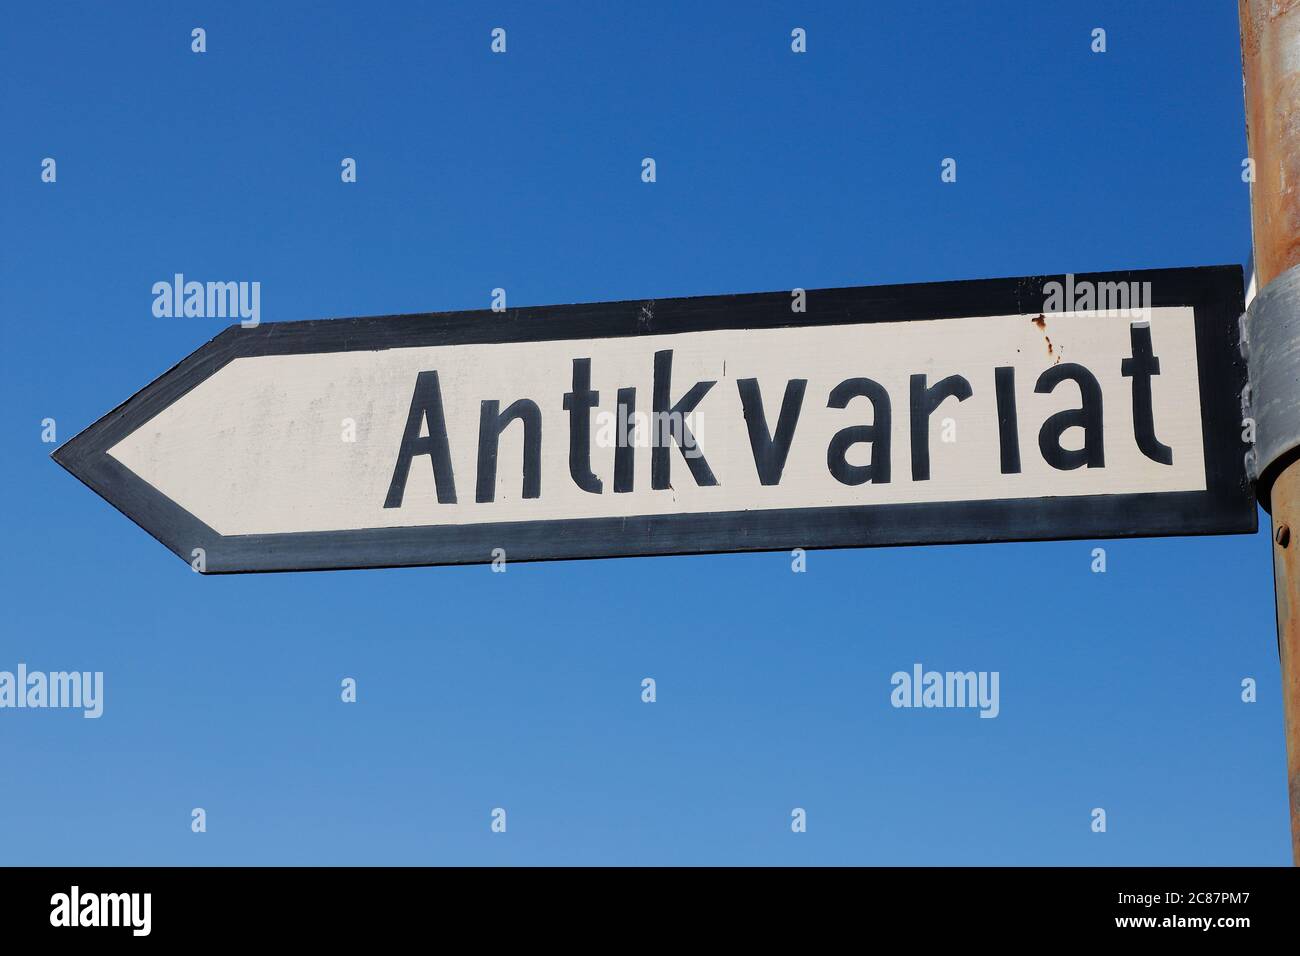 Swedish signpost with direction to a antiquarian. Stock Photo